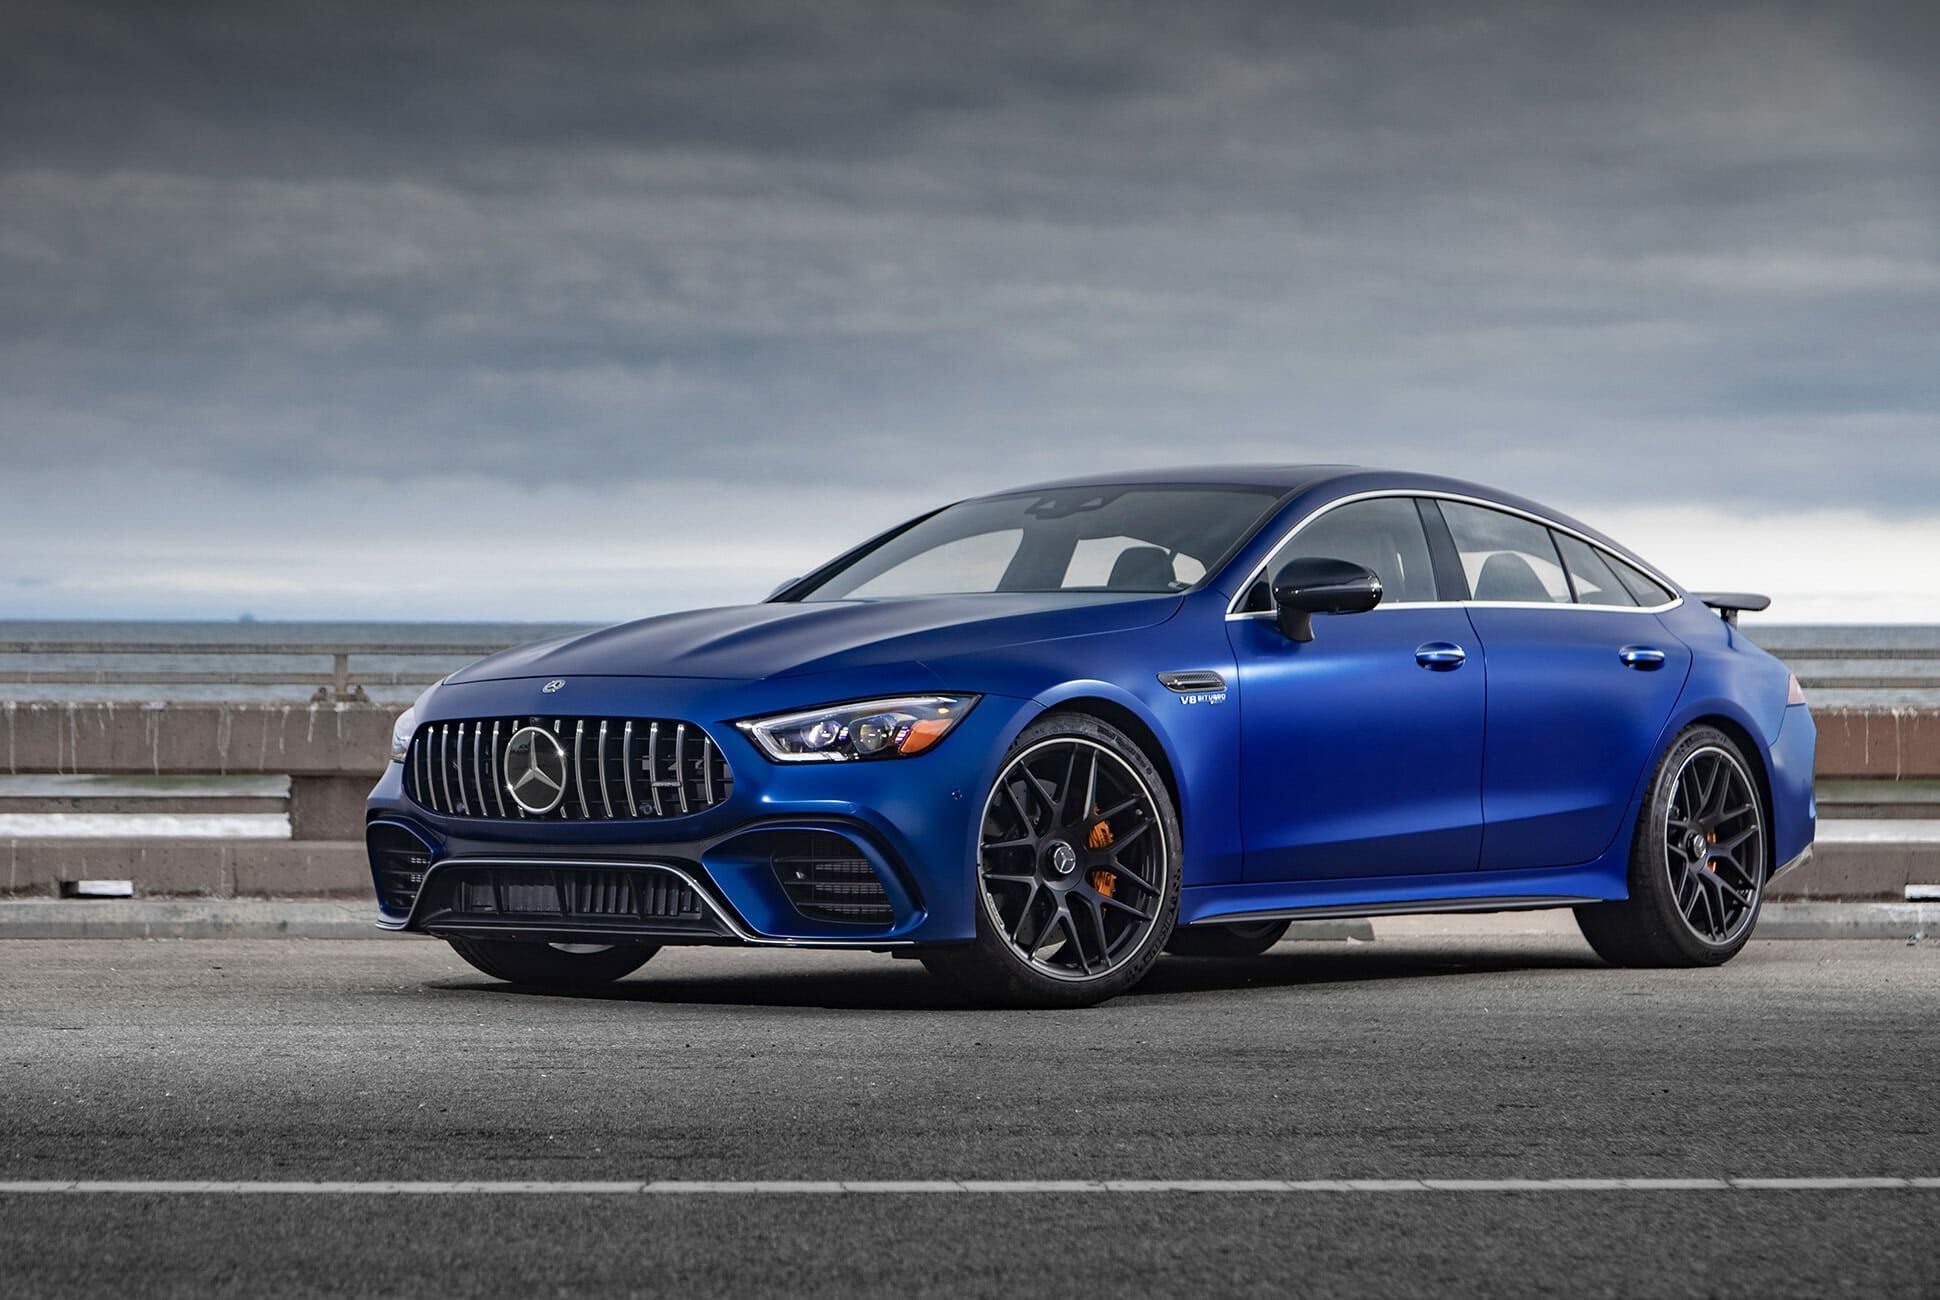 Mercedes-Amg Gt 63 S Review: 1 Car To Rule Them All